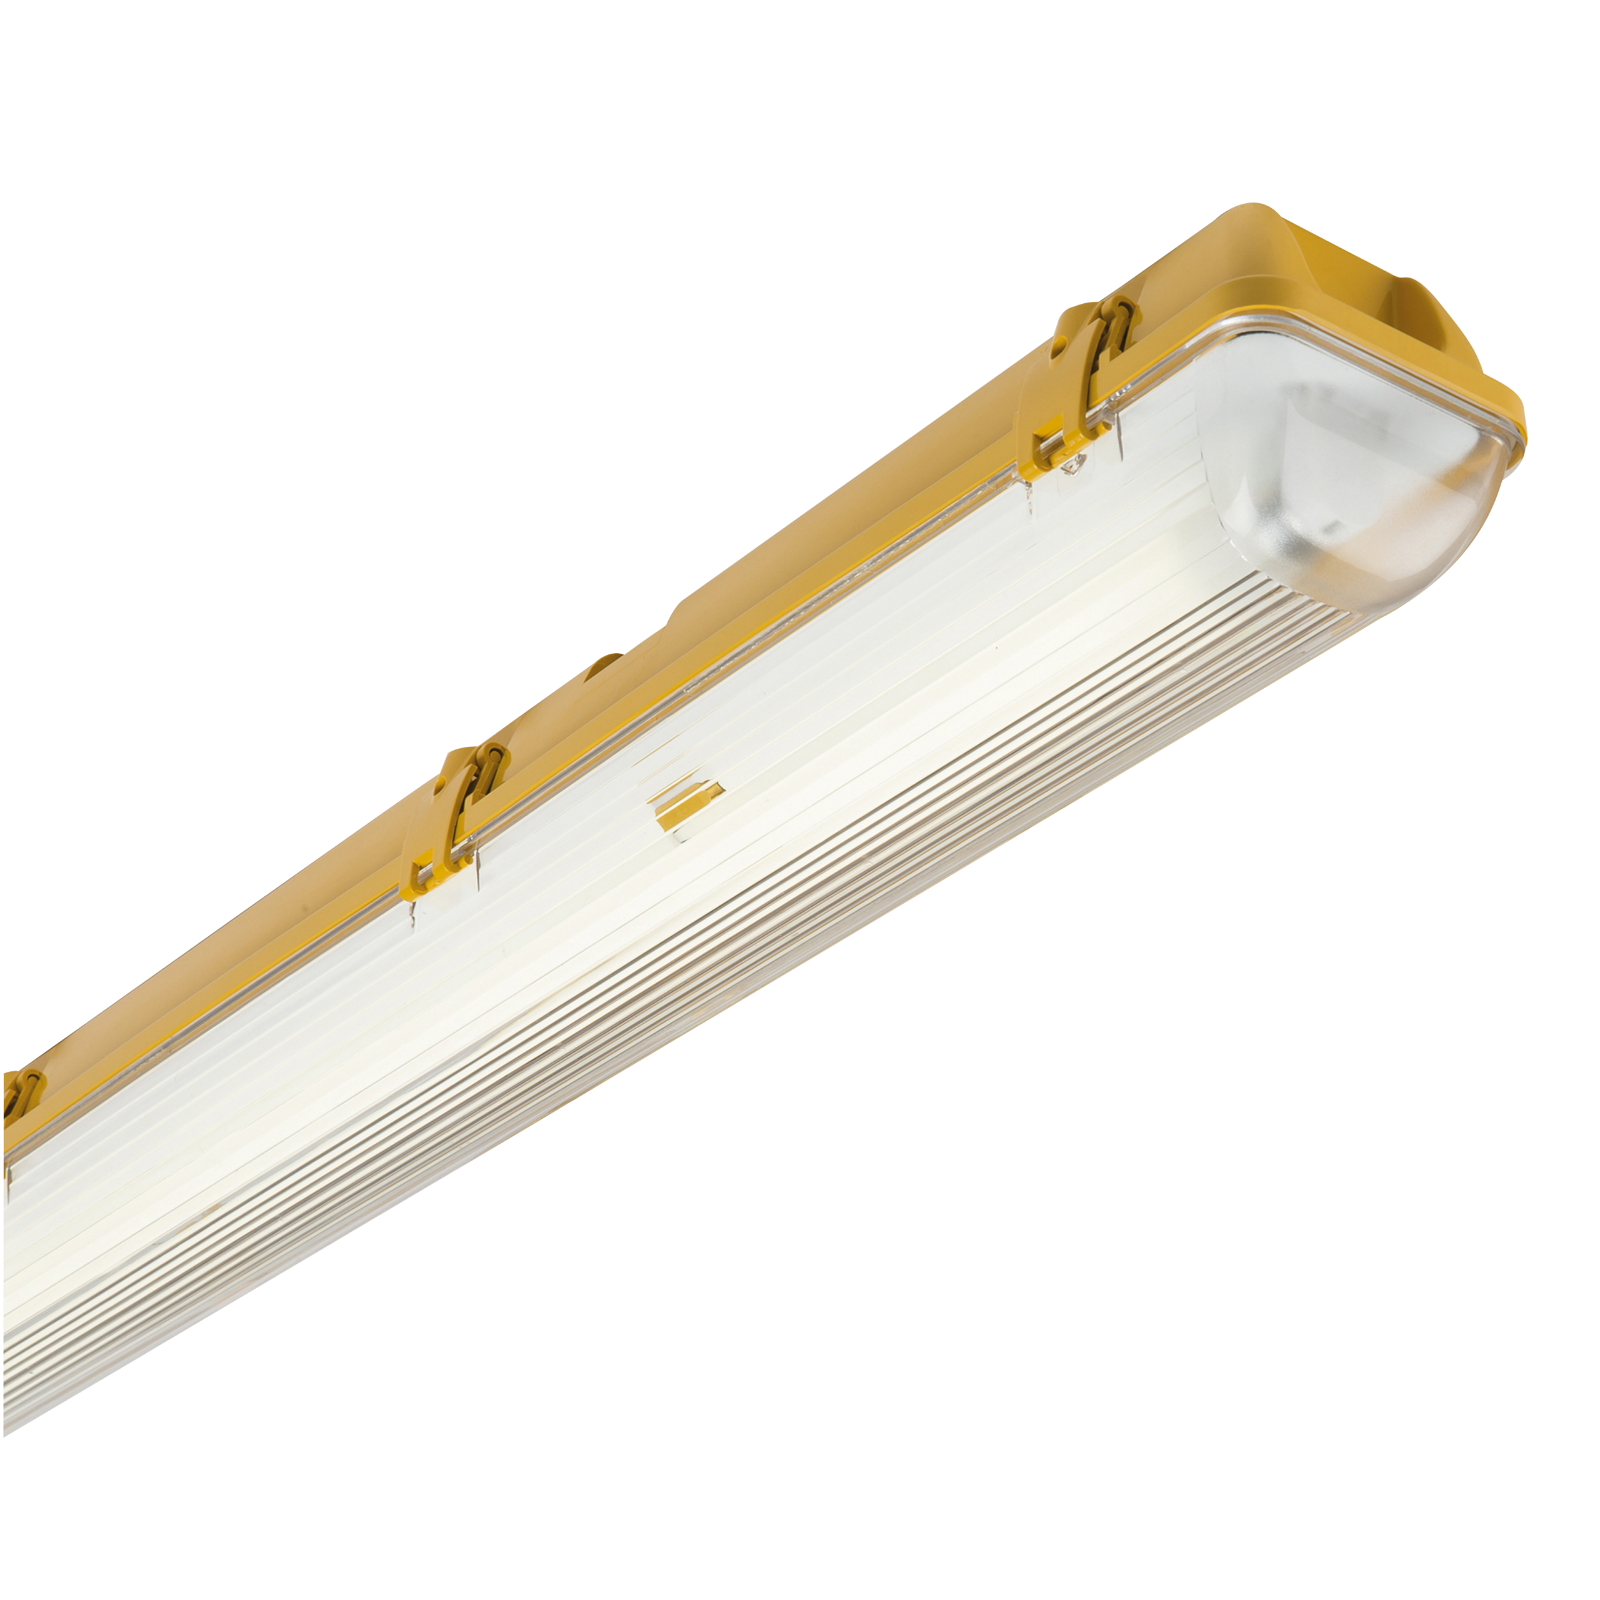 110V IP65 1x58W HF Single Non-Corrosive Emergency Fluorescent Fitting - TR651581EMHF 